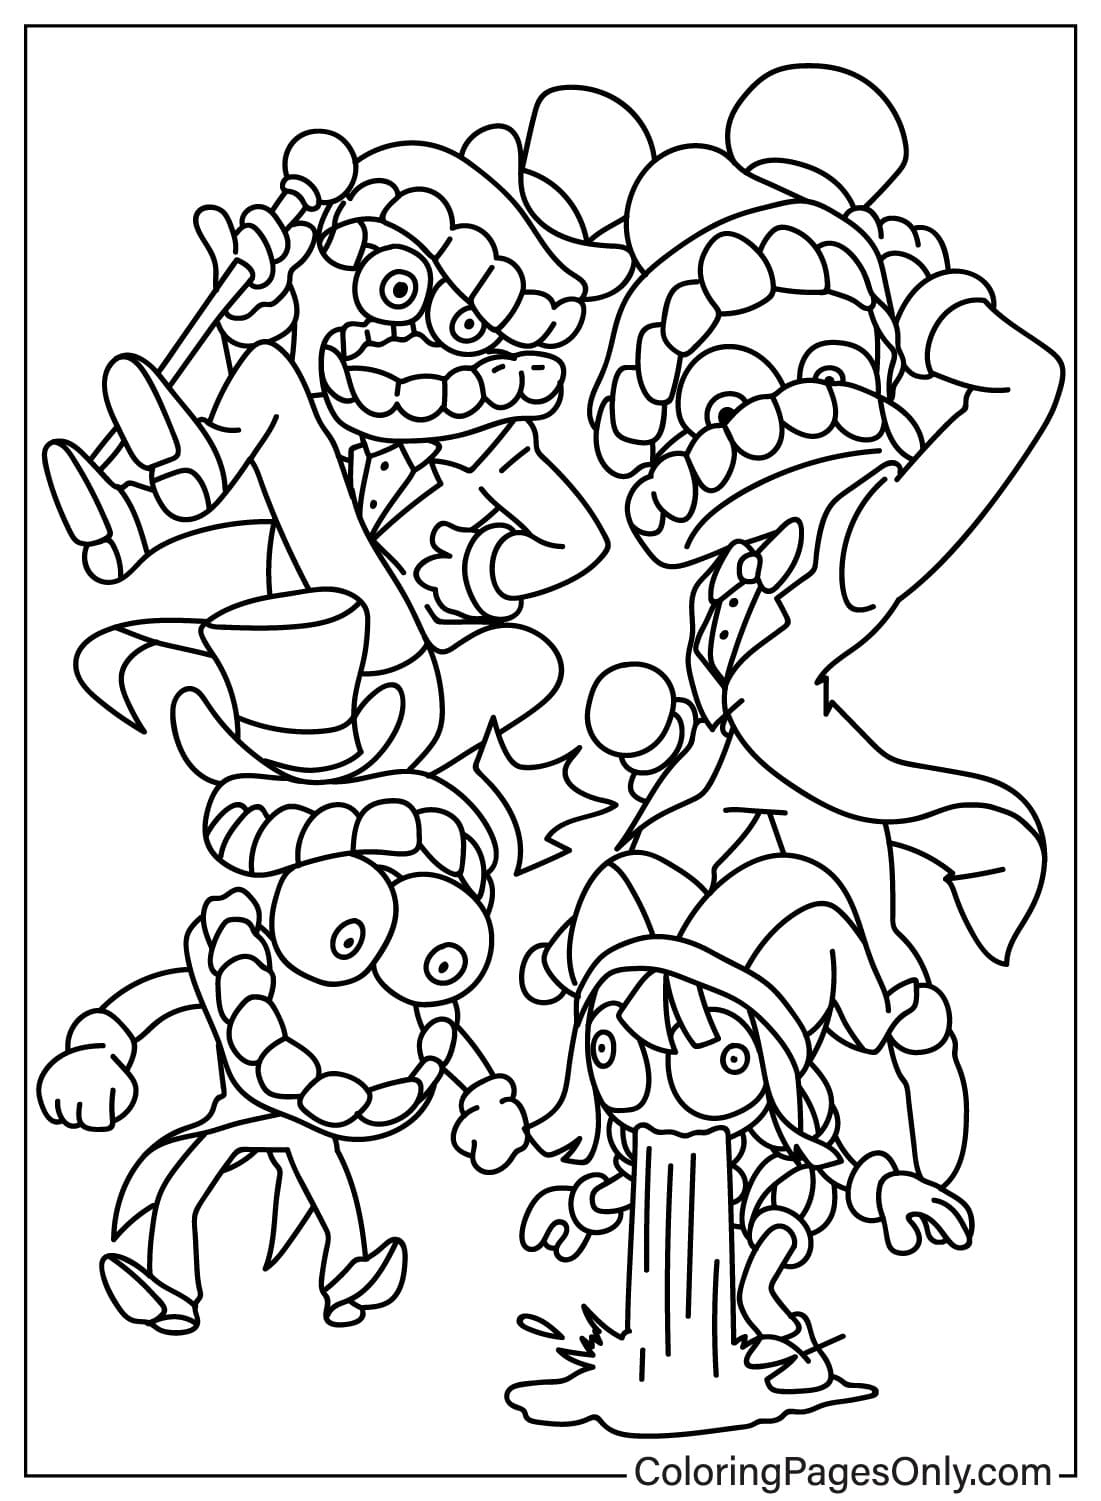 Caine and Pomni Coloring Page from Pomni